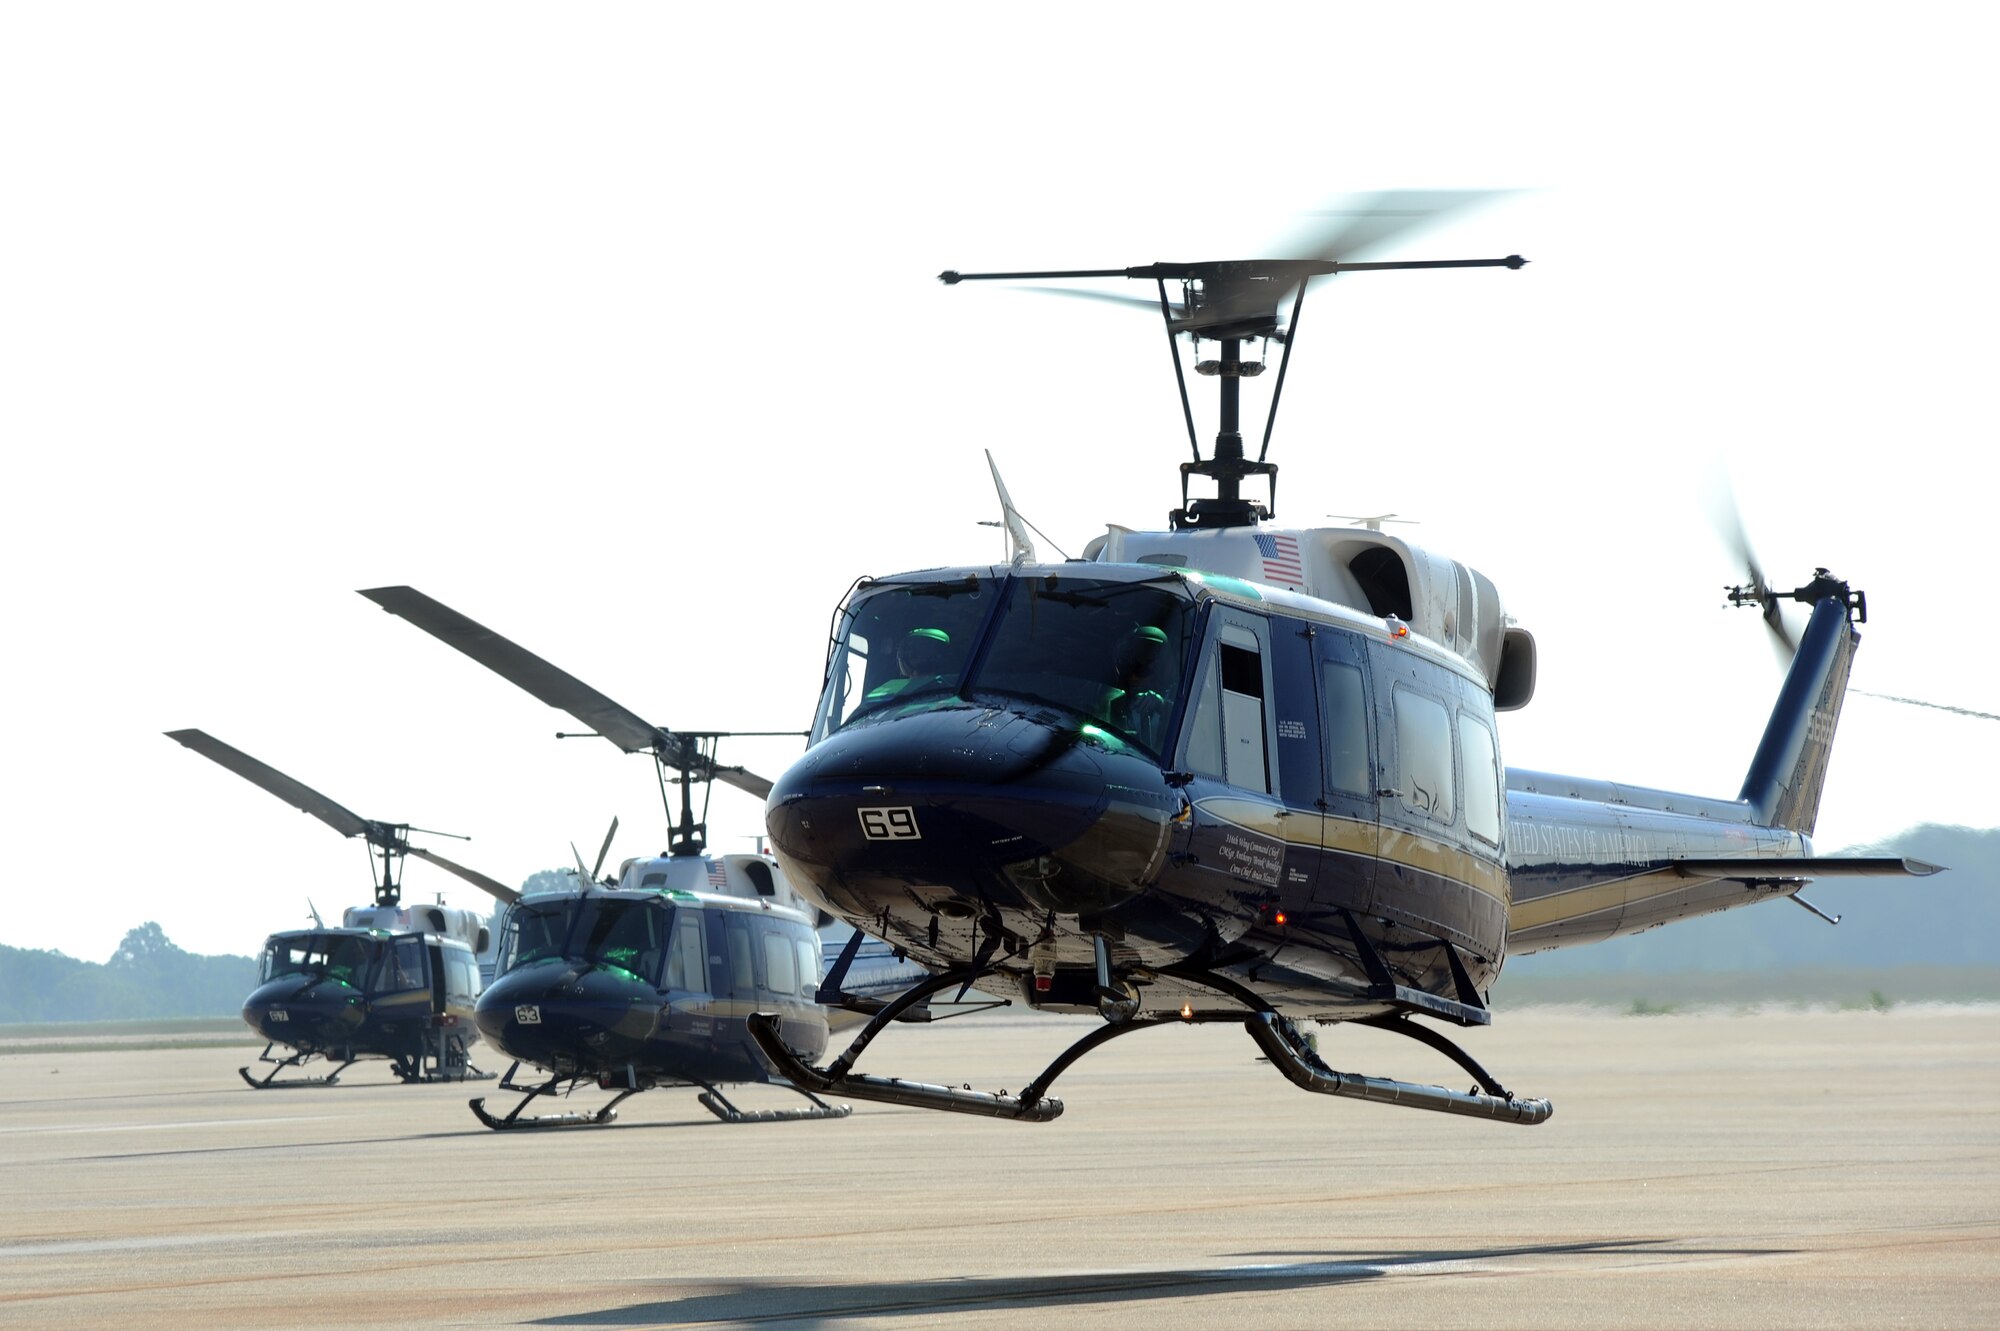 A UH-1N Huey helicopter belonging to the 1st Helicopter Squadron departs for a mission at Joint Base Andrew, Md. June 24, 2010.  The 1 HS is responsible for alert contingency response for the National Capital Region.  (U.S. Air Force photo by Senior Airman Melissa V. Brownstein) 